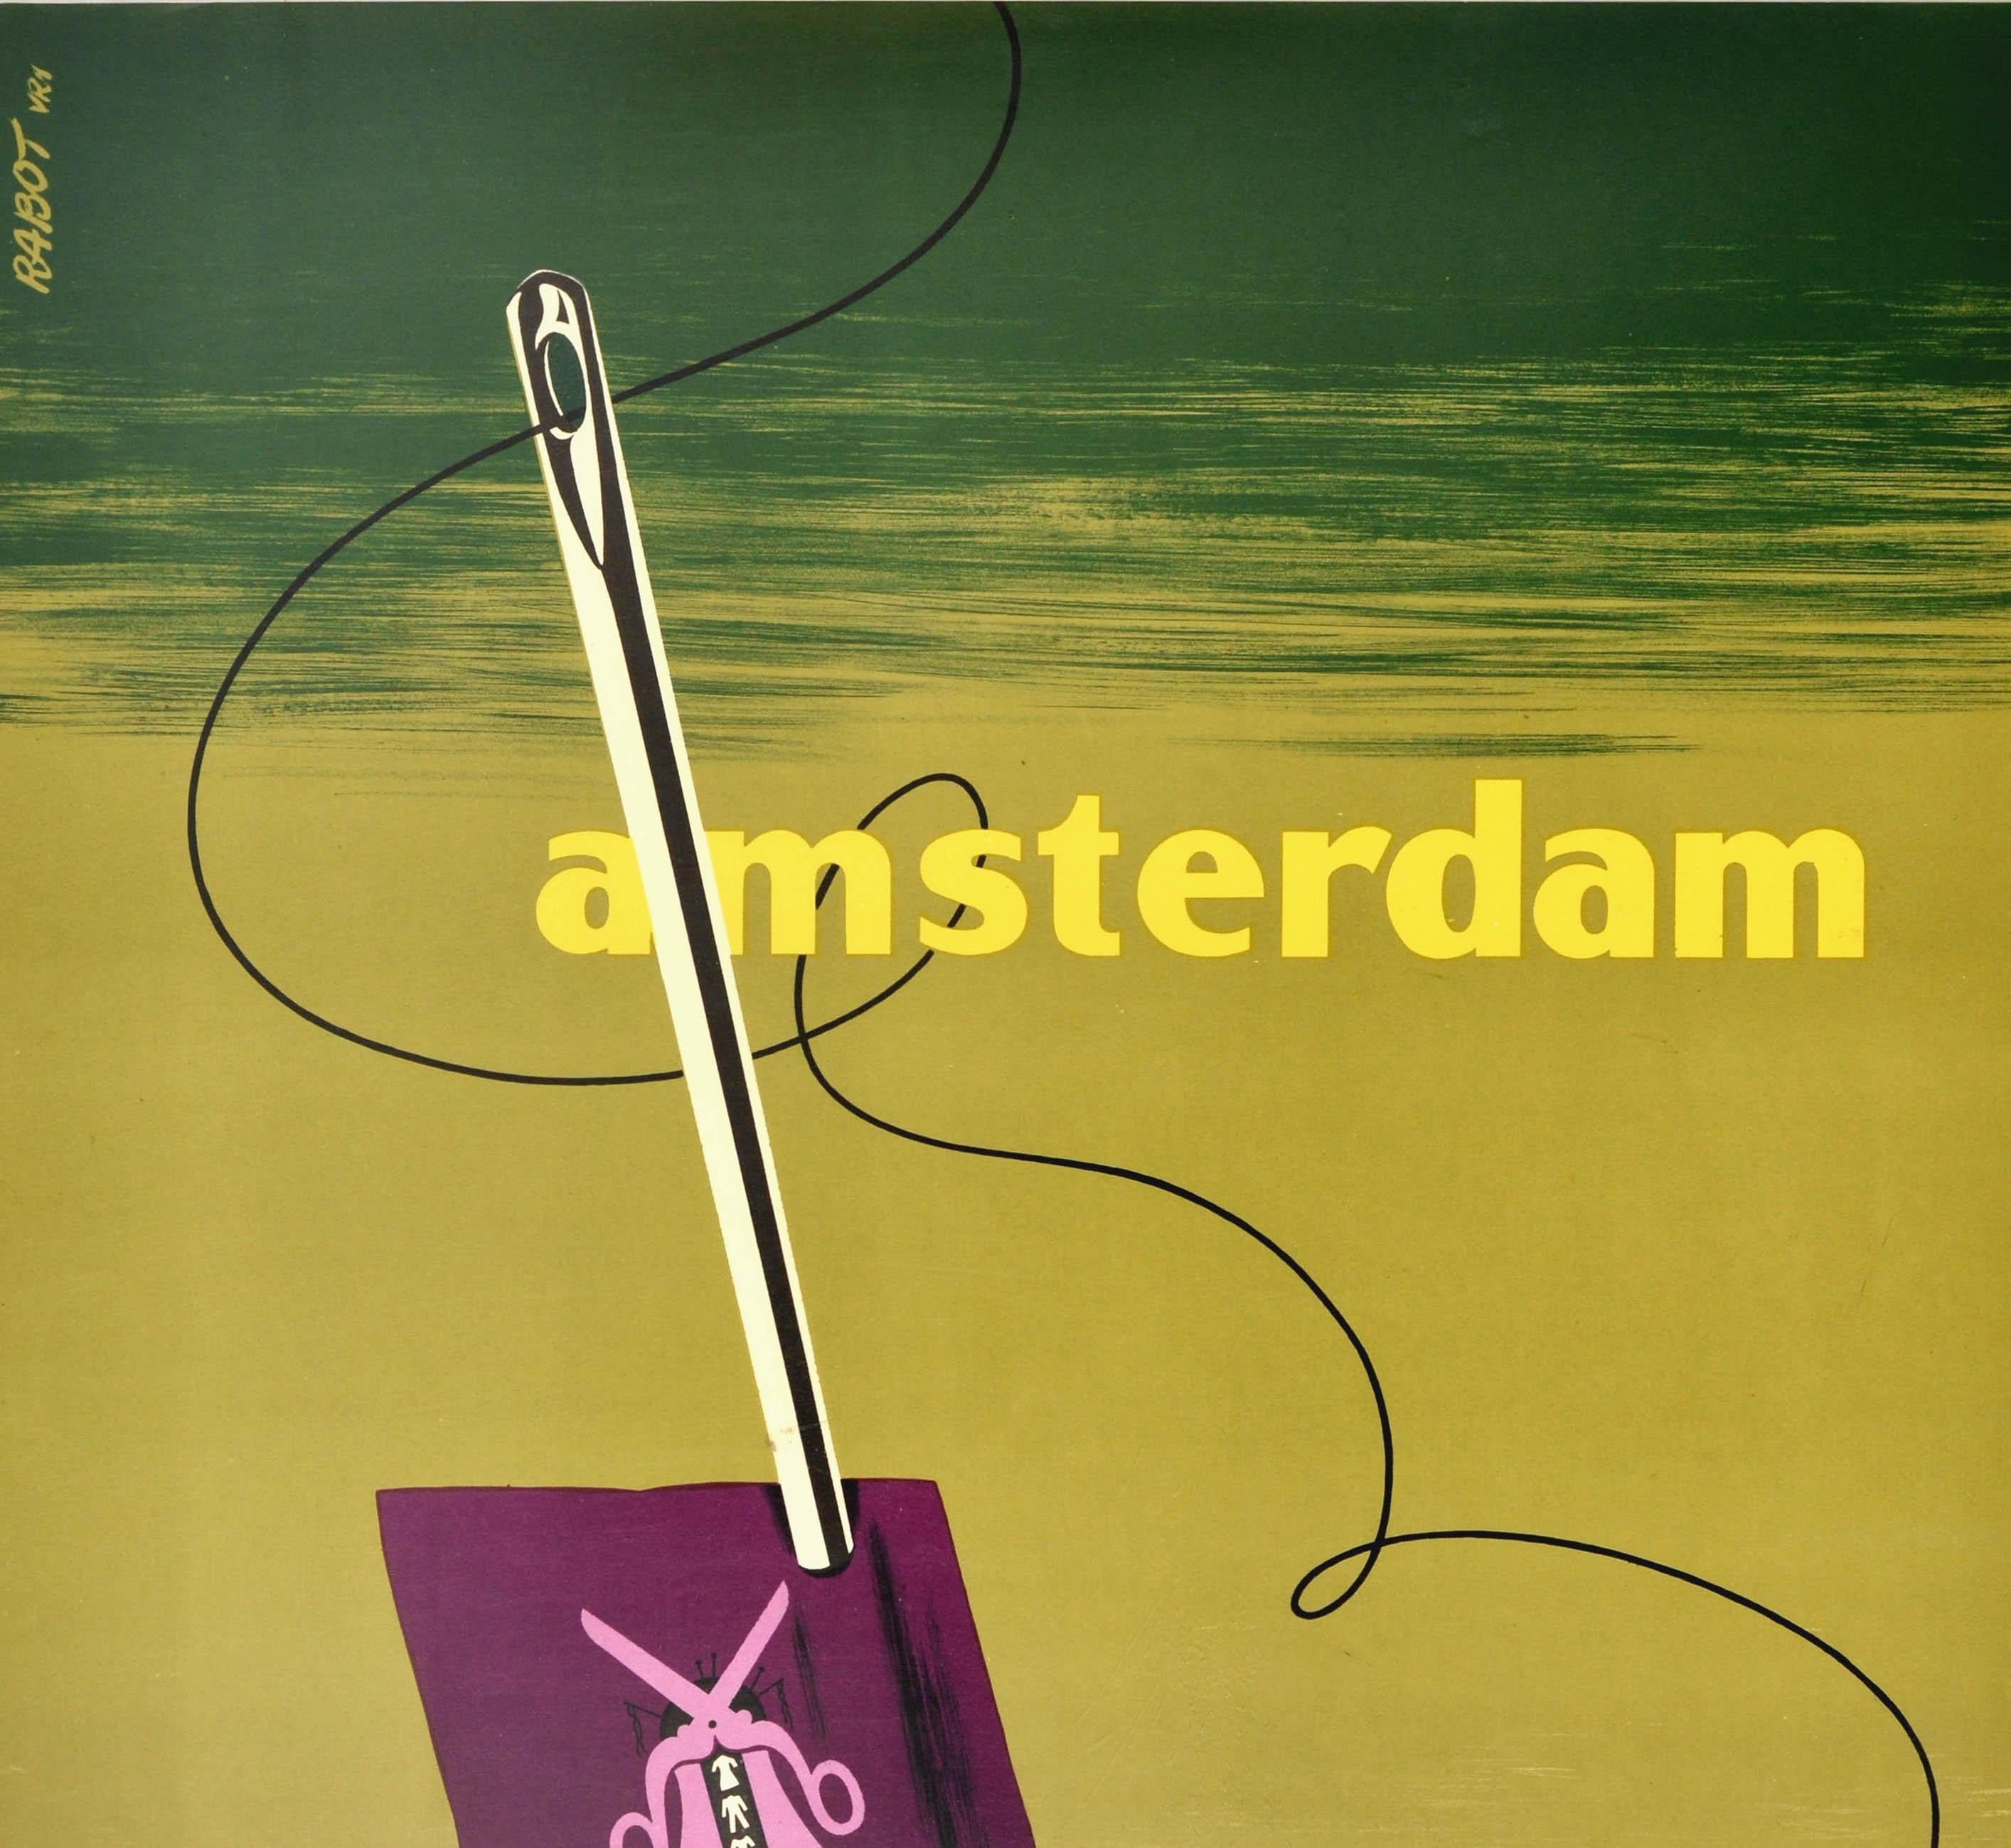 Original vintage advertising poster for the Amsterdam Fashion Week 16-21 November 1953 featuring a great mid-century design of a pair of scissors and images of clothing styles on a purple cloth pierced by a sewing needle diagonally in the centre